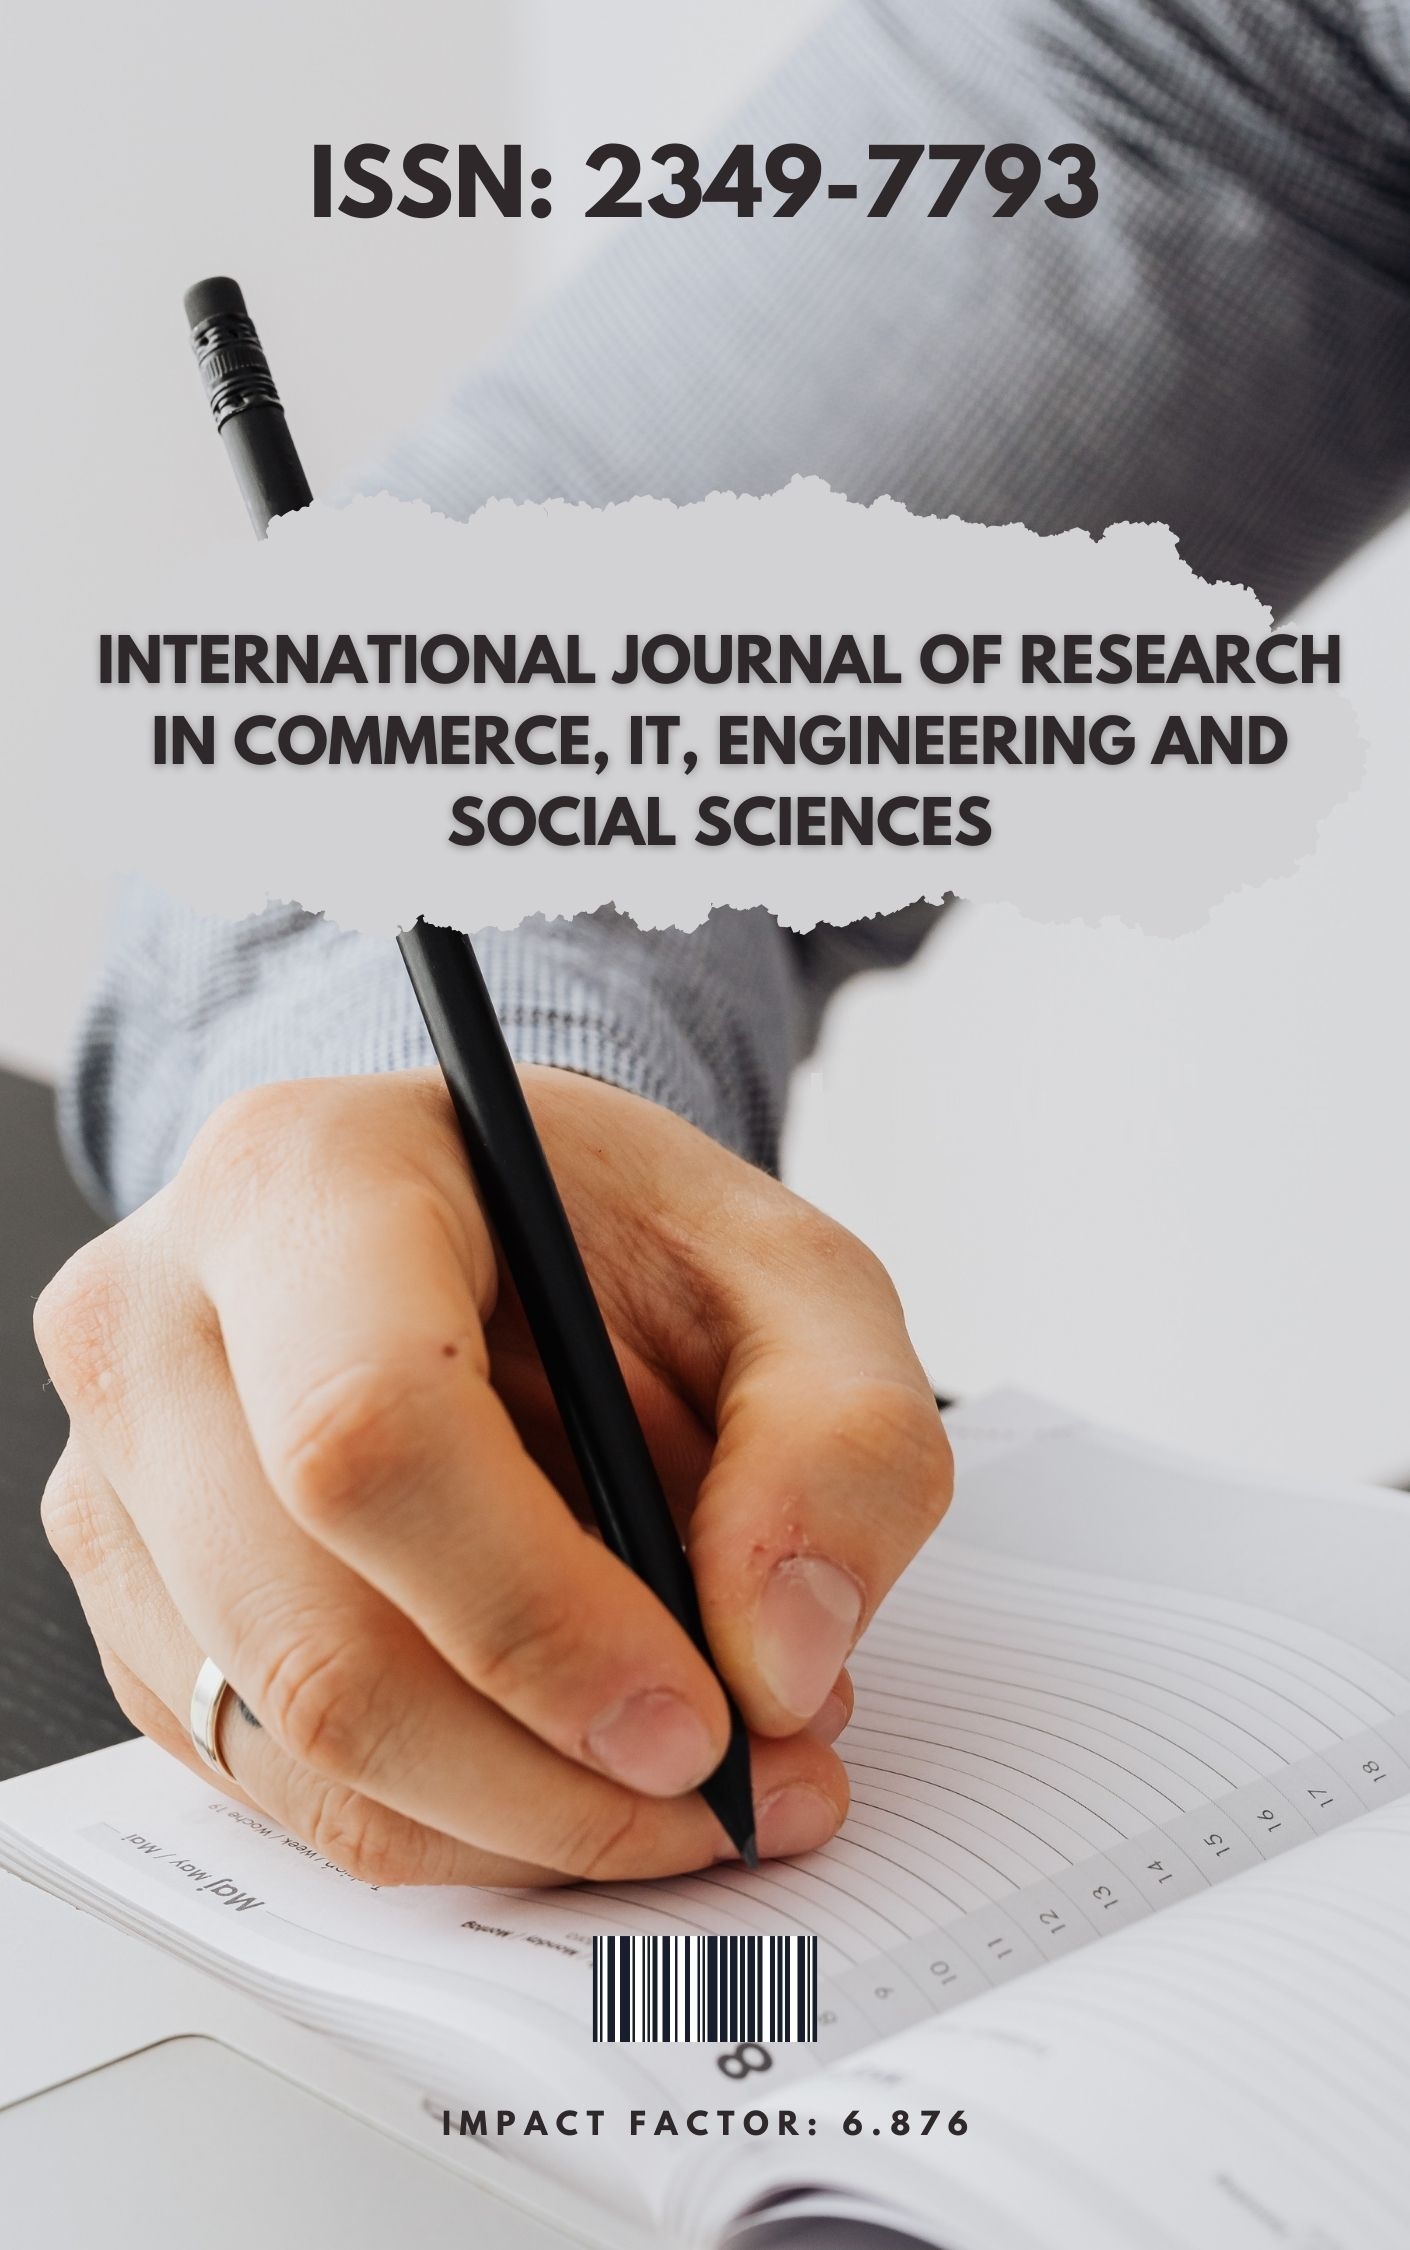 					View Vol. 15 No. 11 (2021): International Journal of Research in Commerce, IT, Engineering, and Social Sciences
				